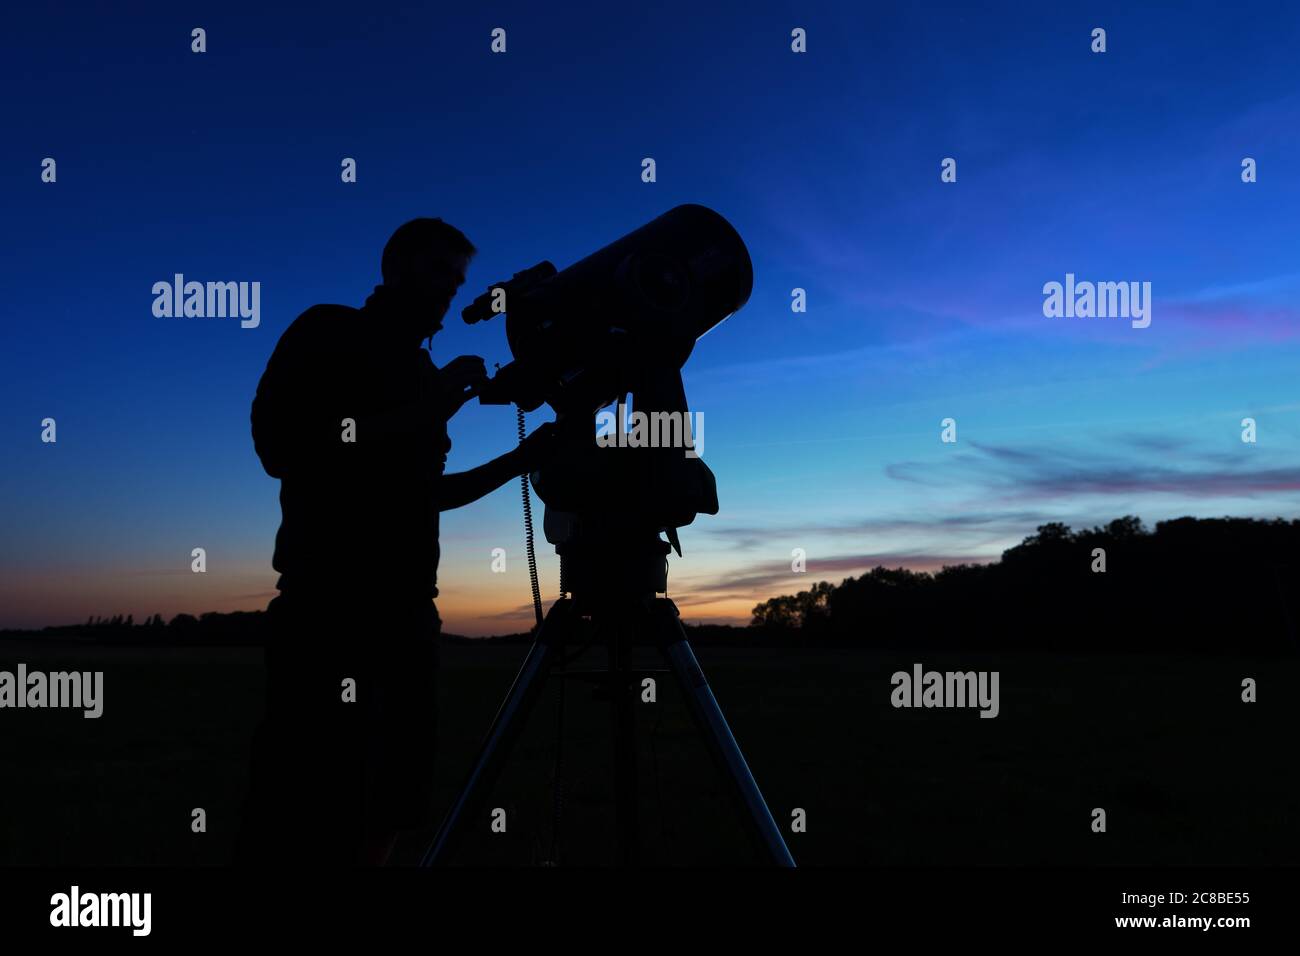 silhouette of a man setting up a telescope for night observation on dark blue sky at dusk Stock Photo